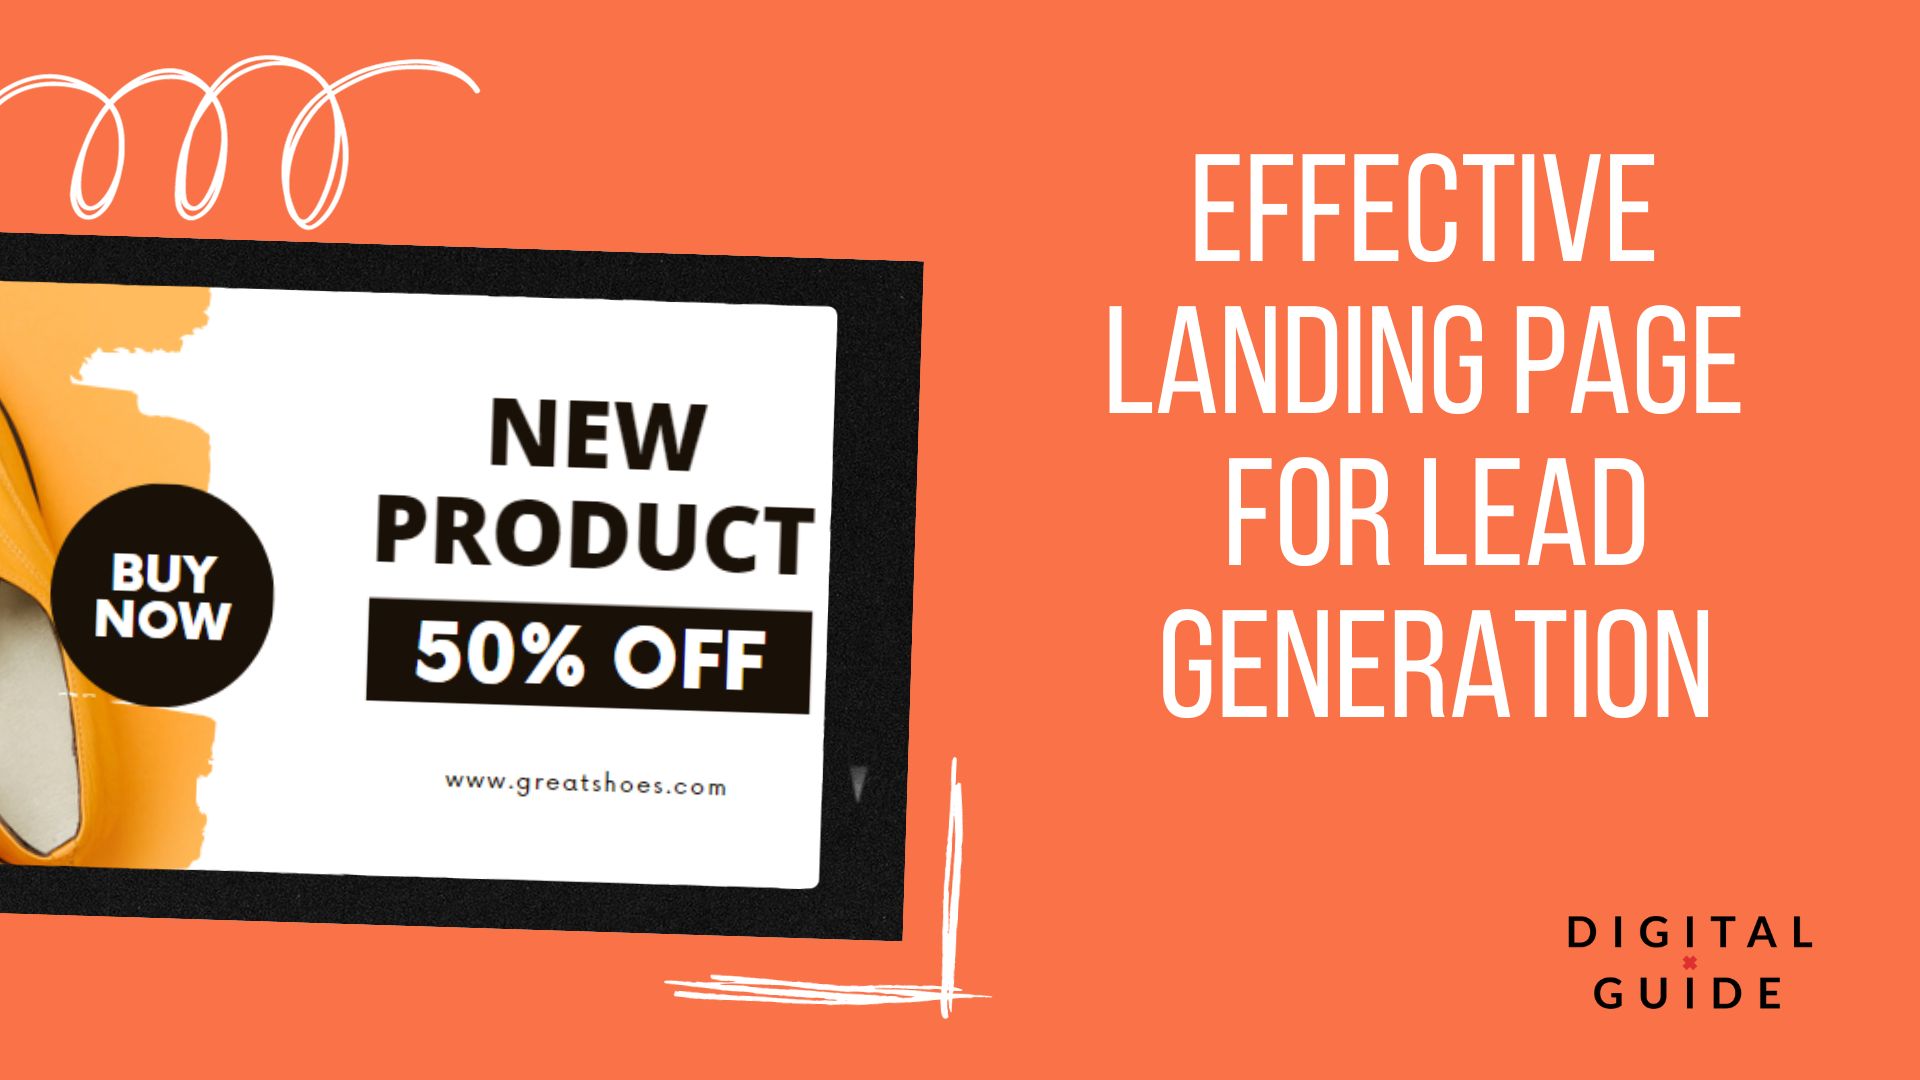 Image of a tablet displaying an effective landing page for lead generation, featuring a clean and user-friendly design with compelling visuals and a clear call-to-action.